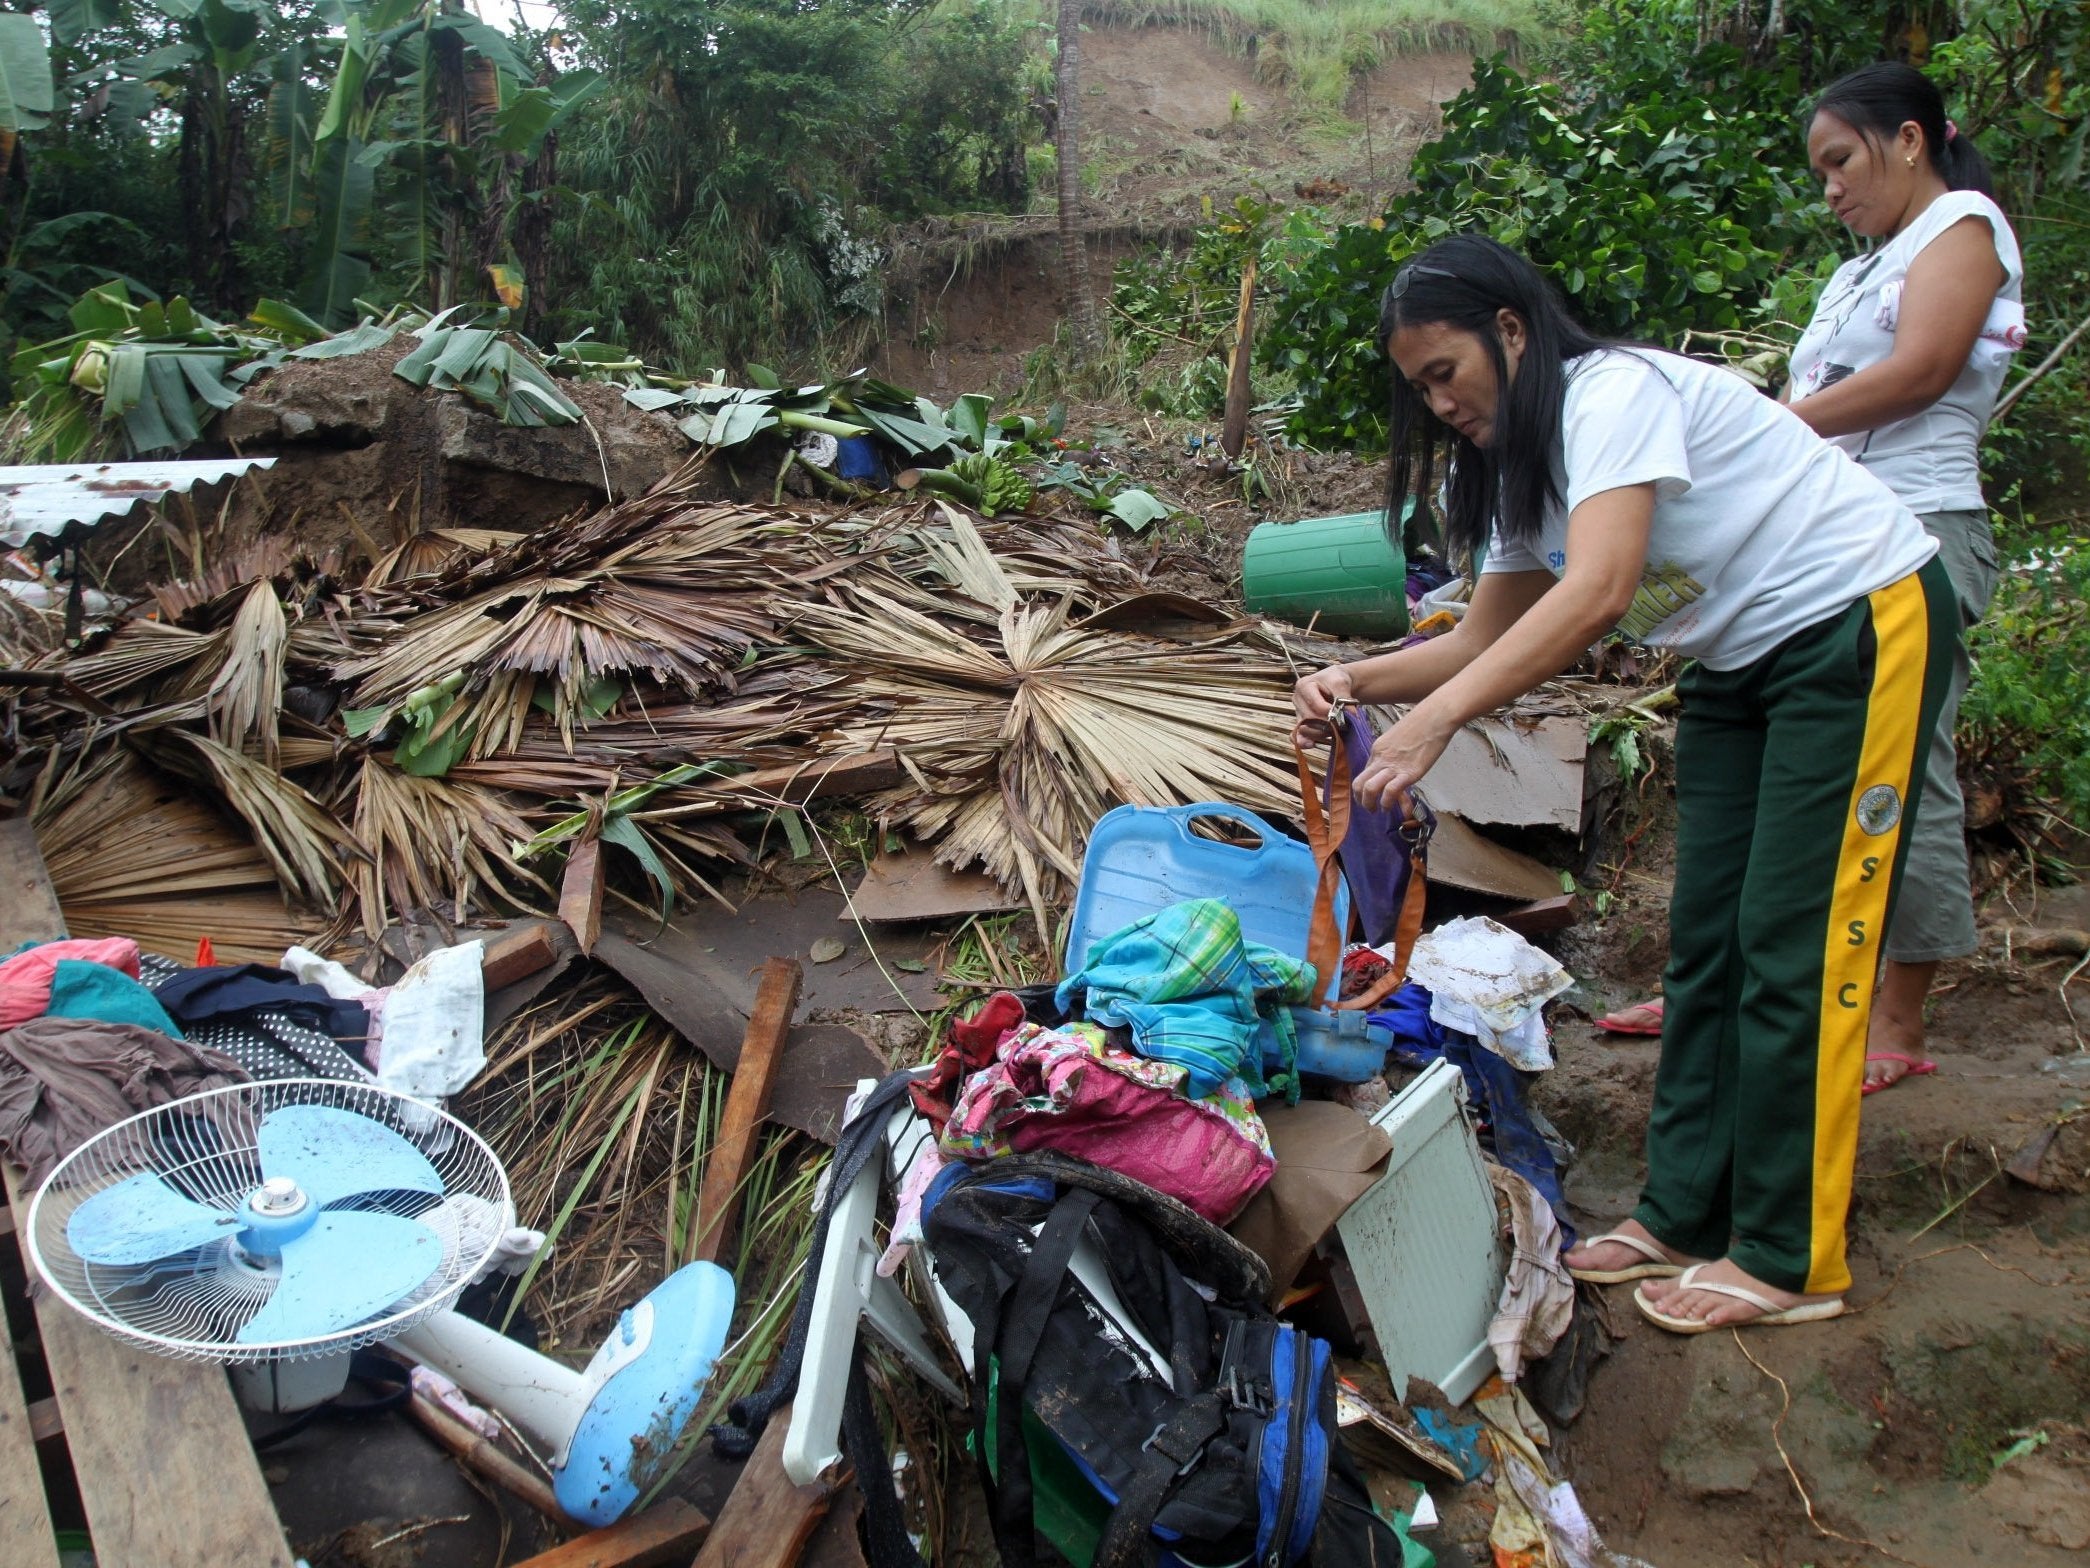 Filipino residents collect belongings from their damaged home at the landslide-hit community in Bulan, Sorsogon province